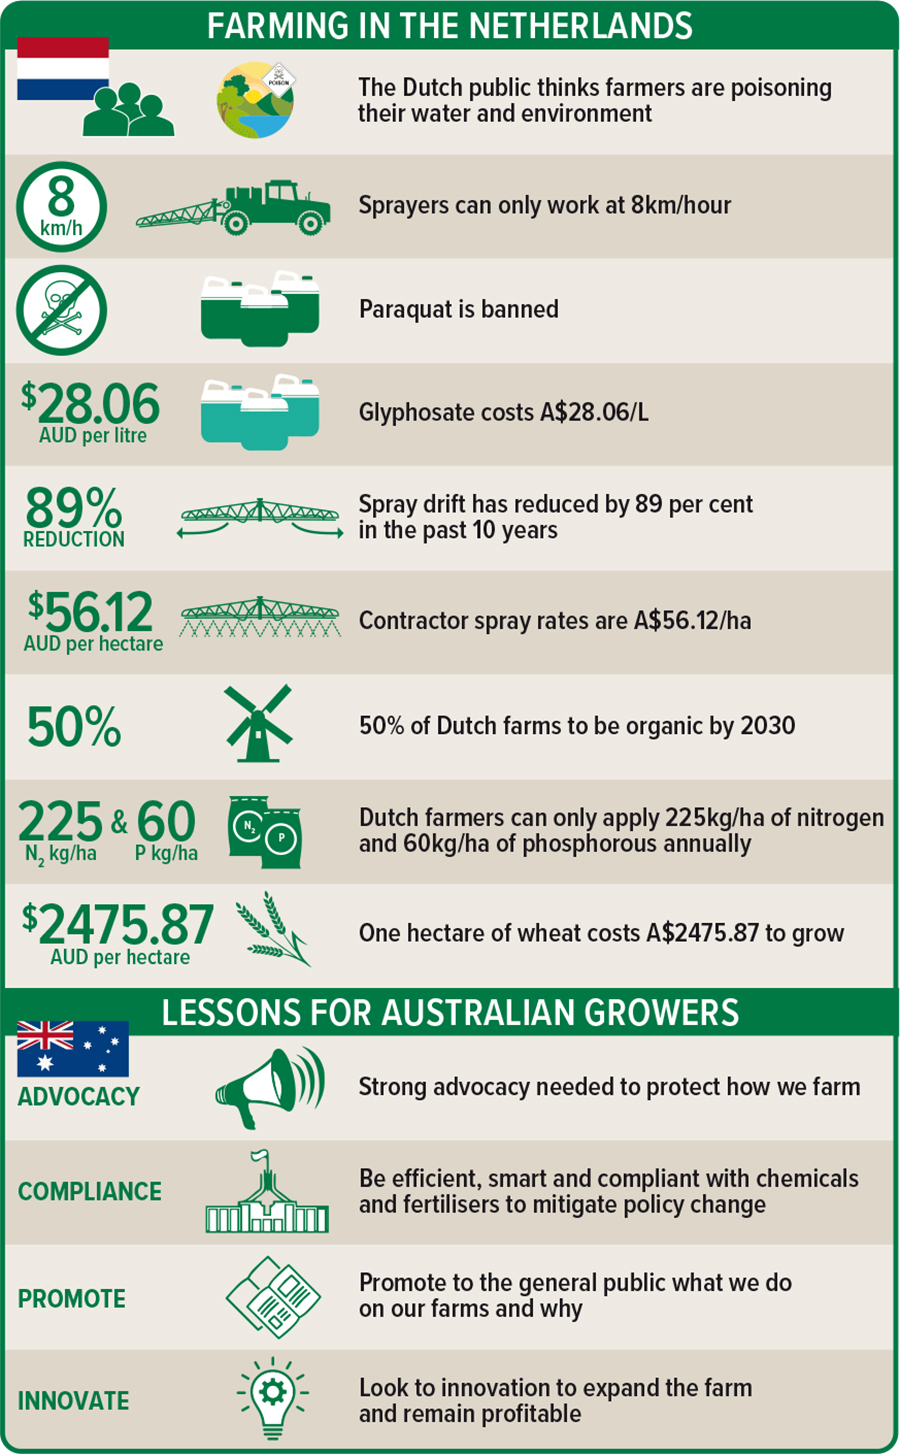 An infographic to summarise the key messages of the article.